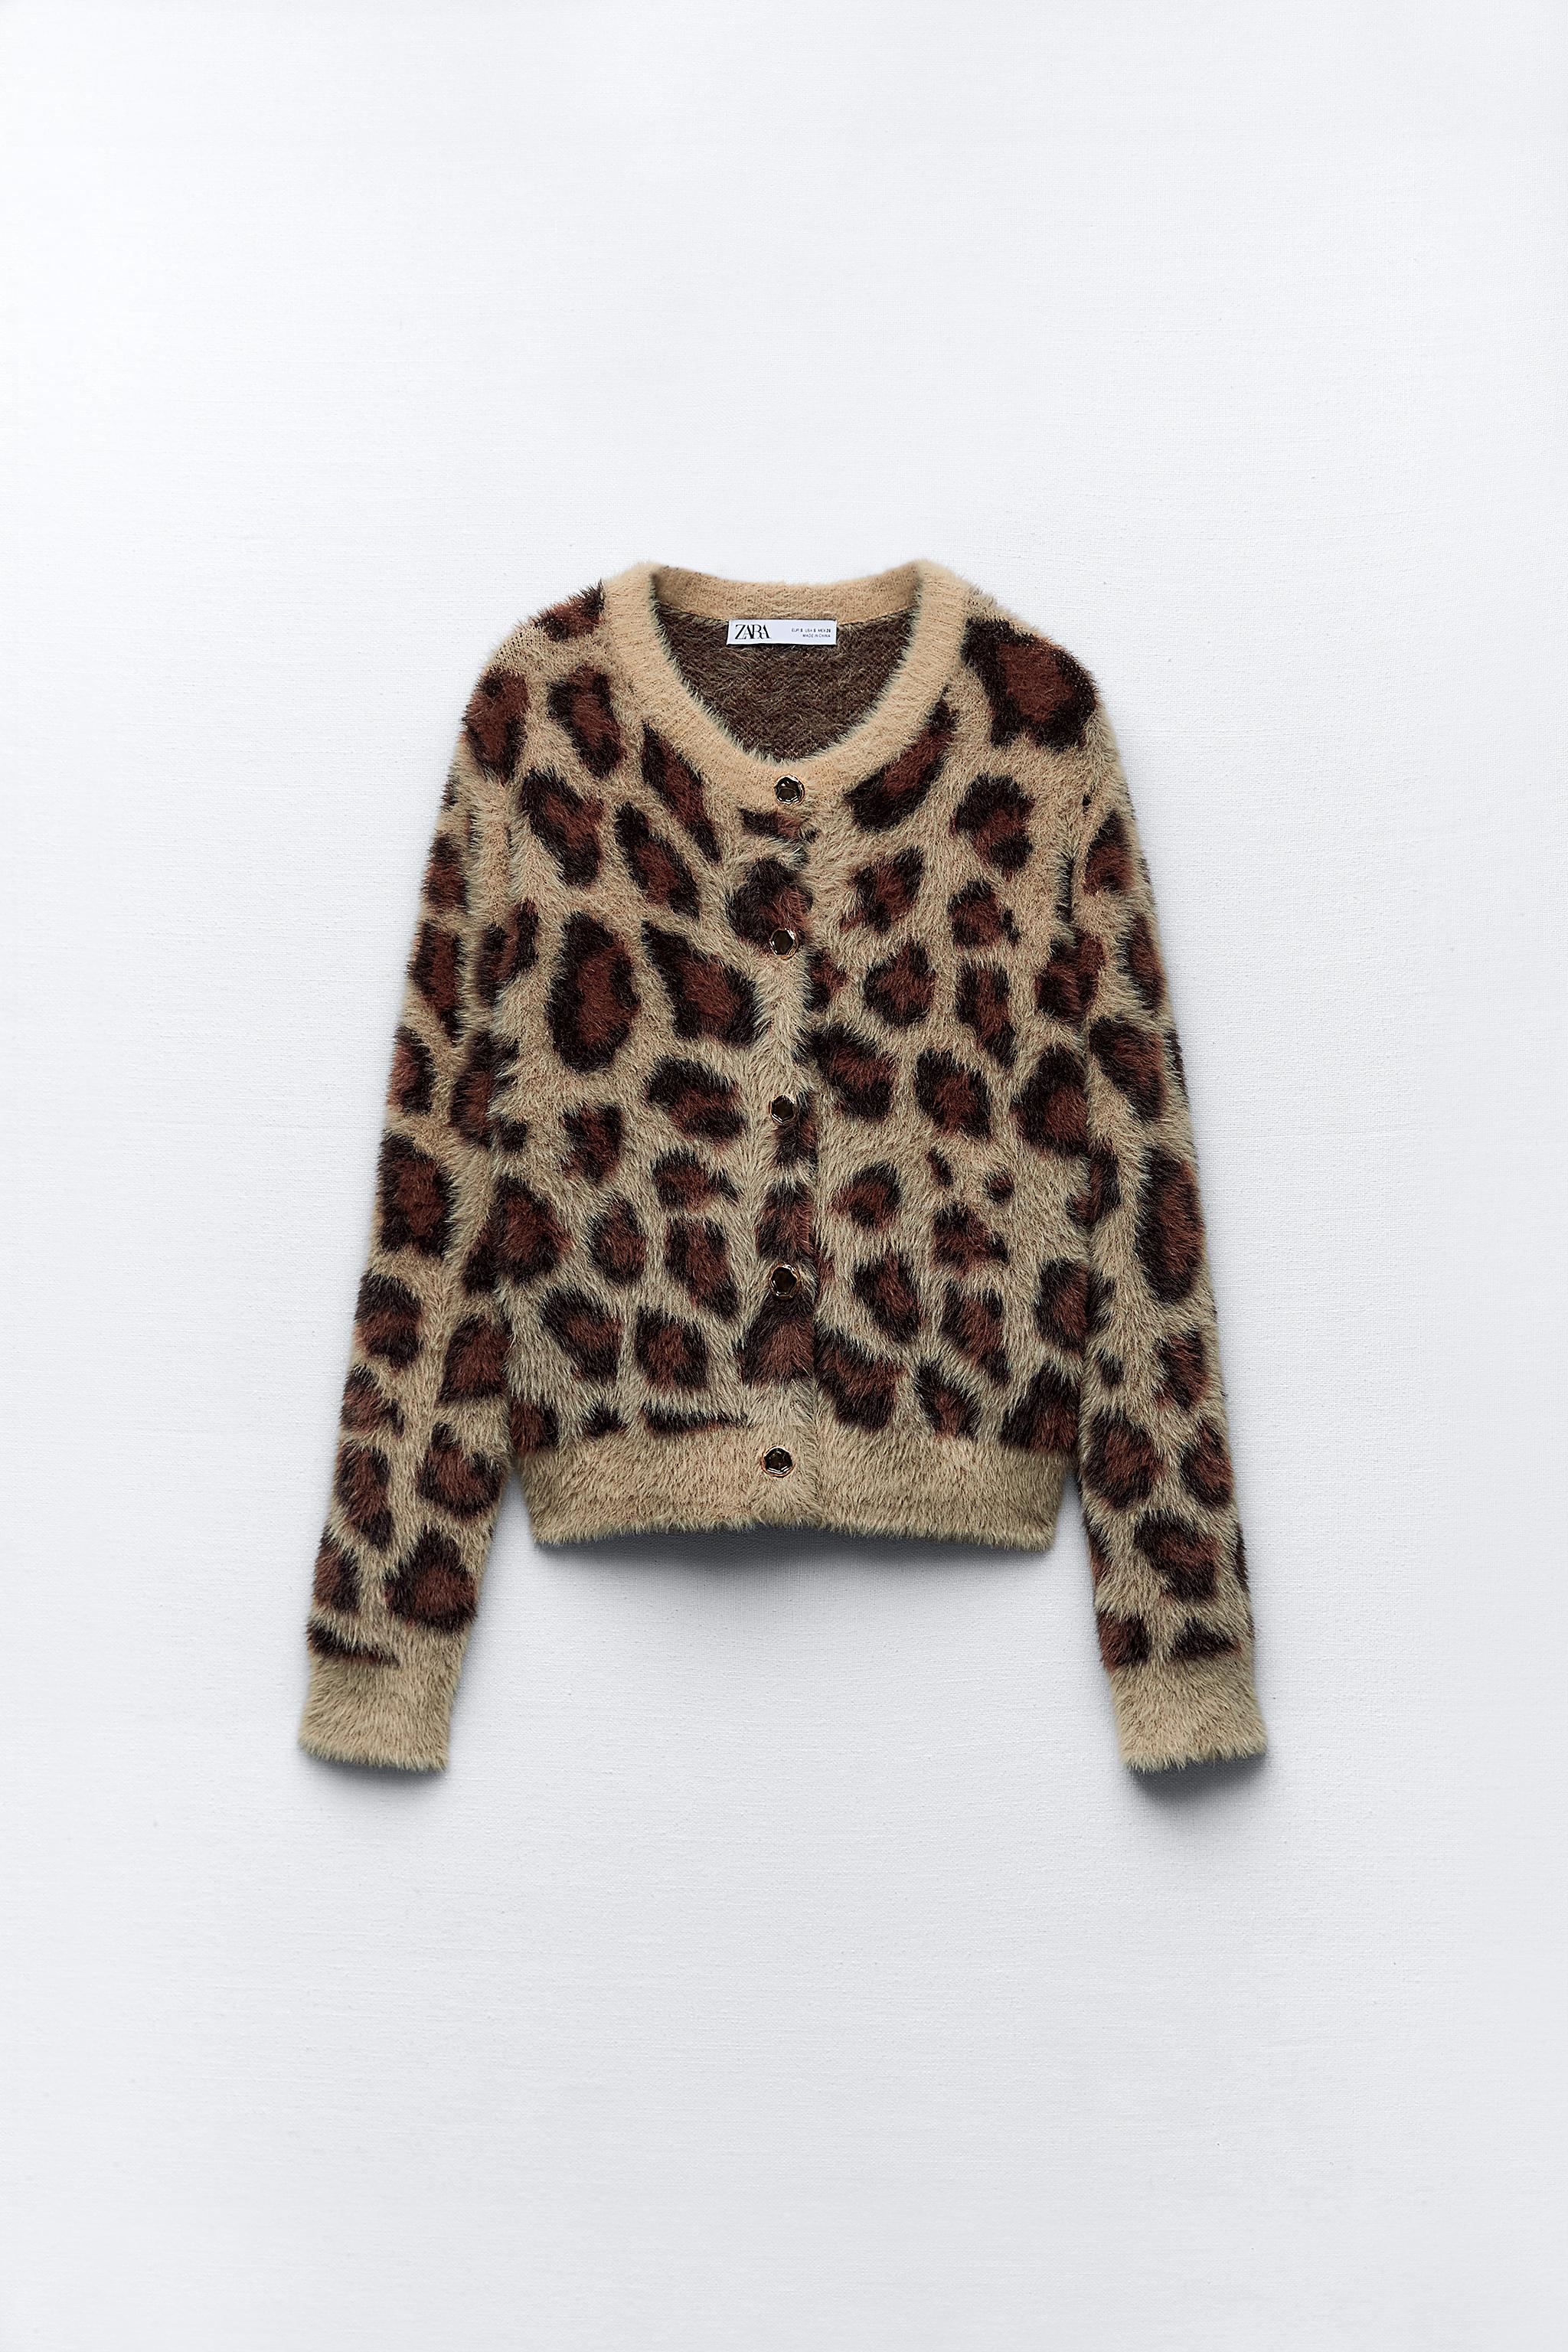 DRYKORN Leopard Jacquard Fluffy Sweater in Brown for Men